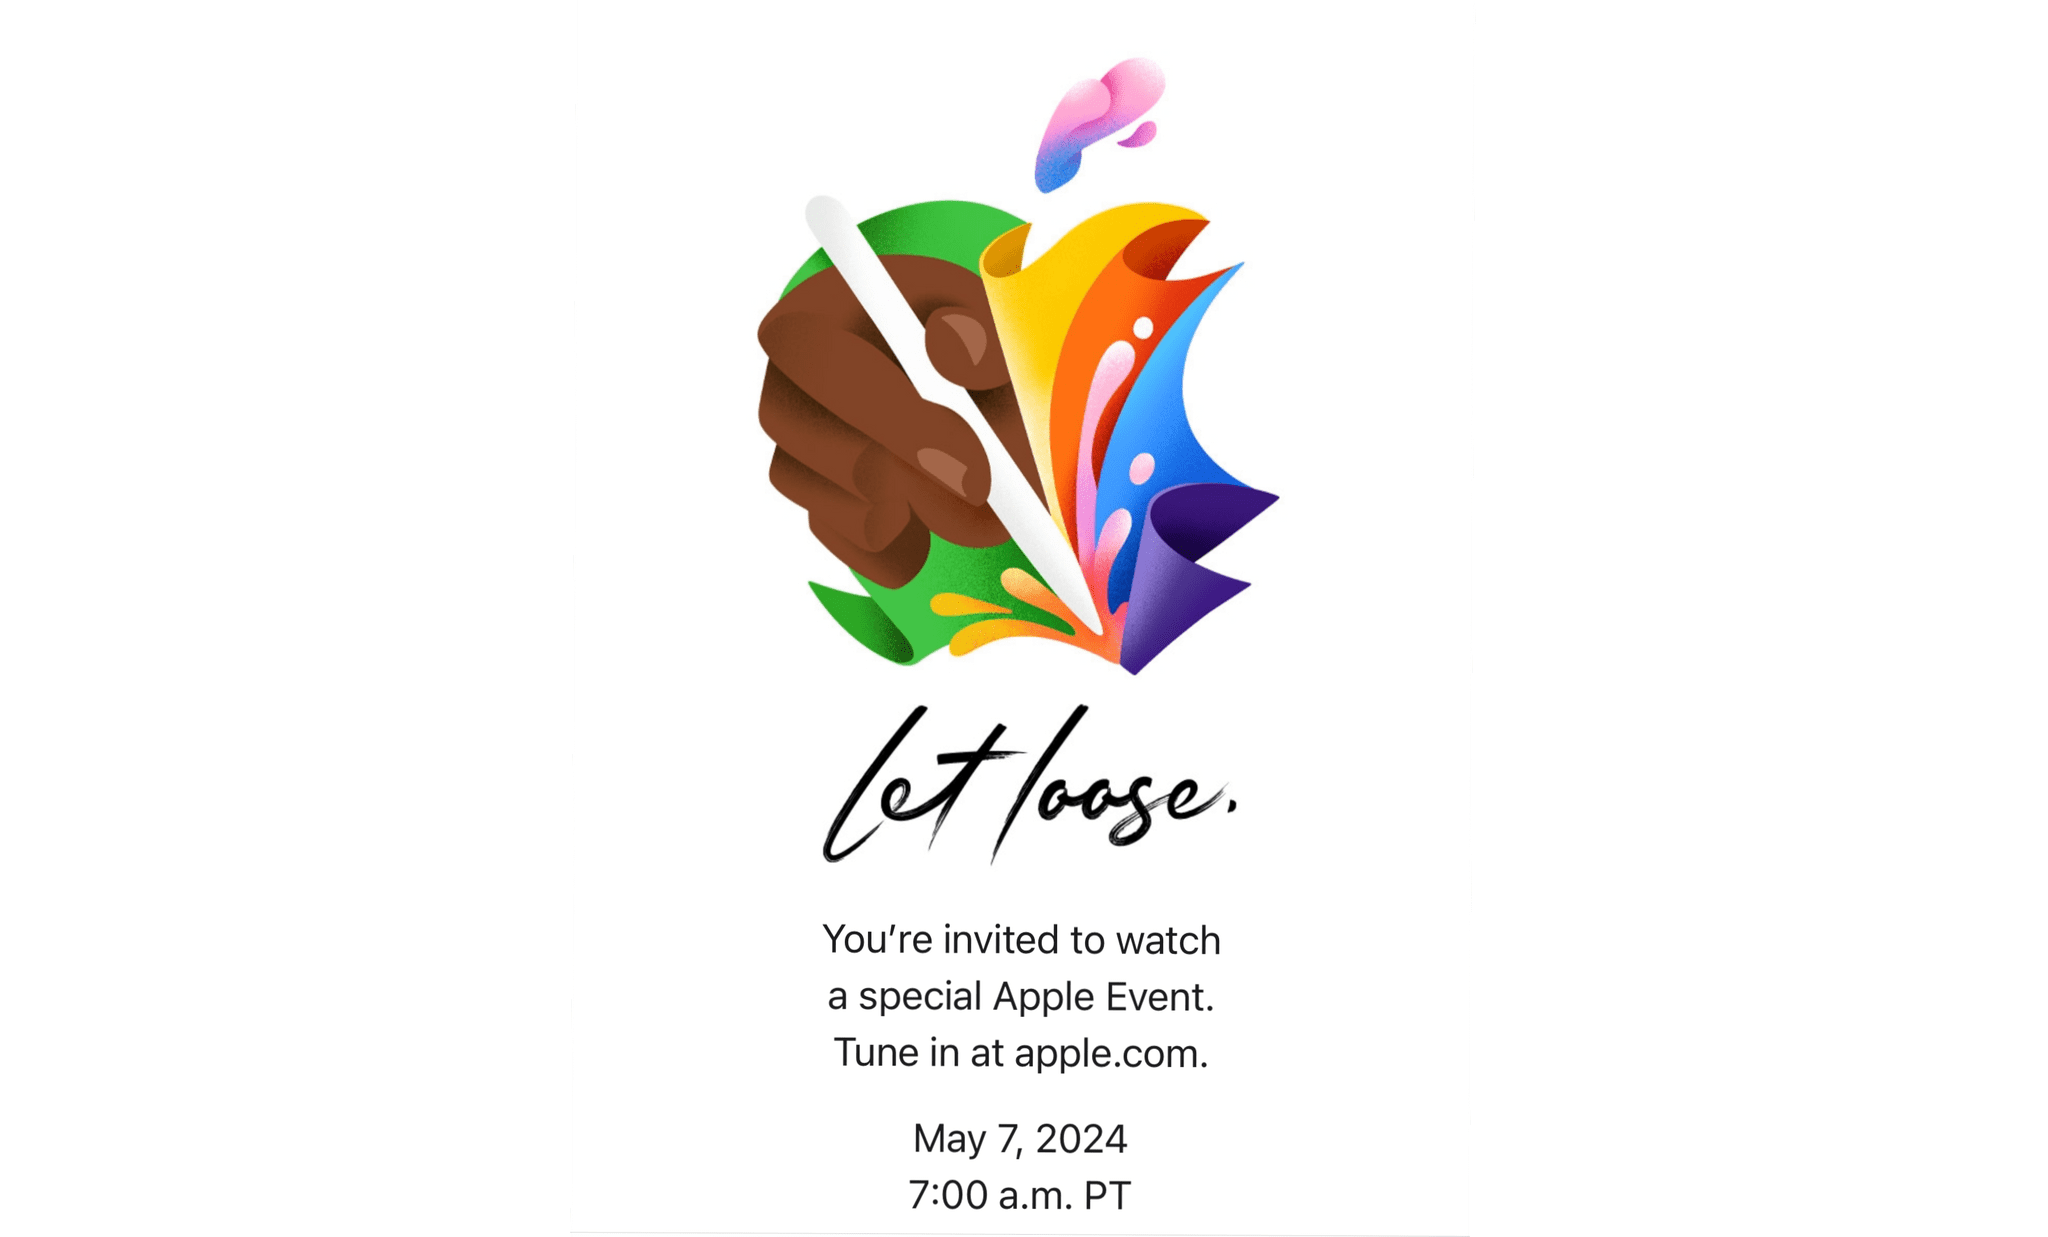 Apple Announces May 7th Let Loose Event